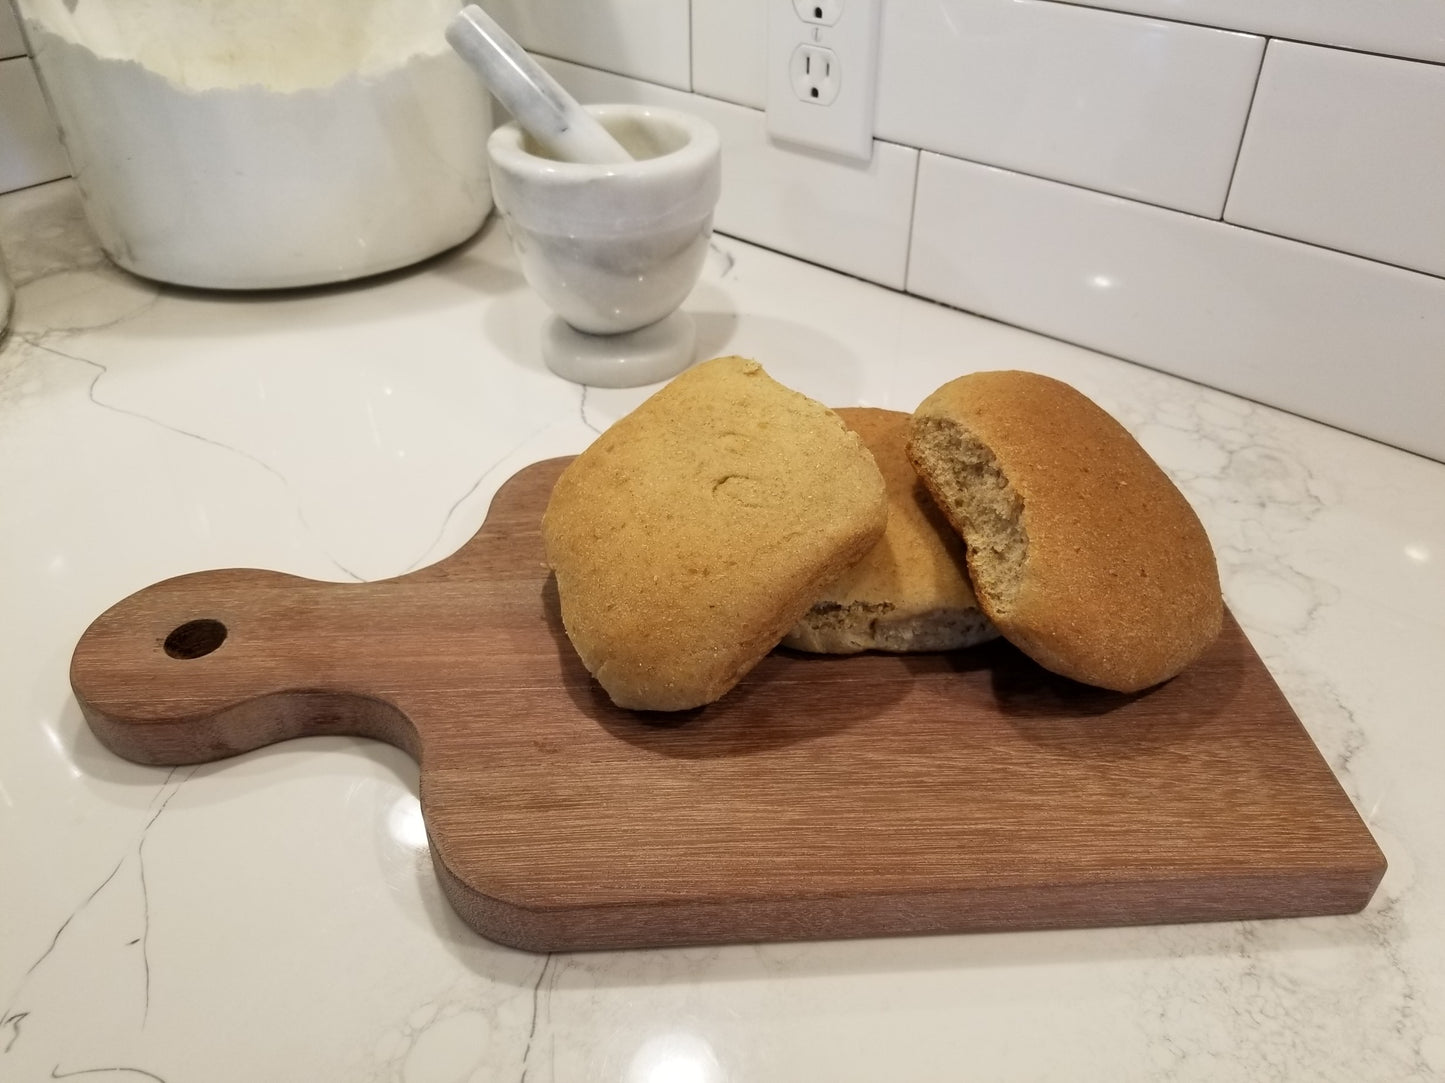 Look at this artisan bread board that holds your moms best whole wheat buns.